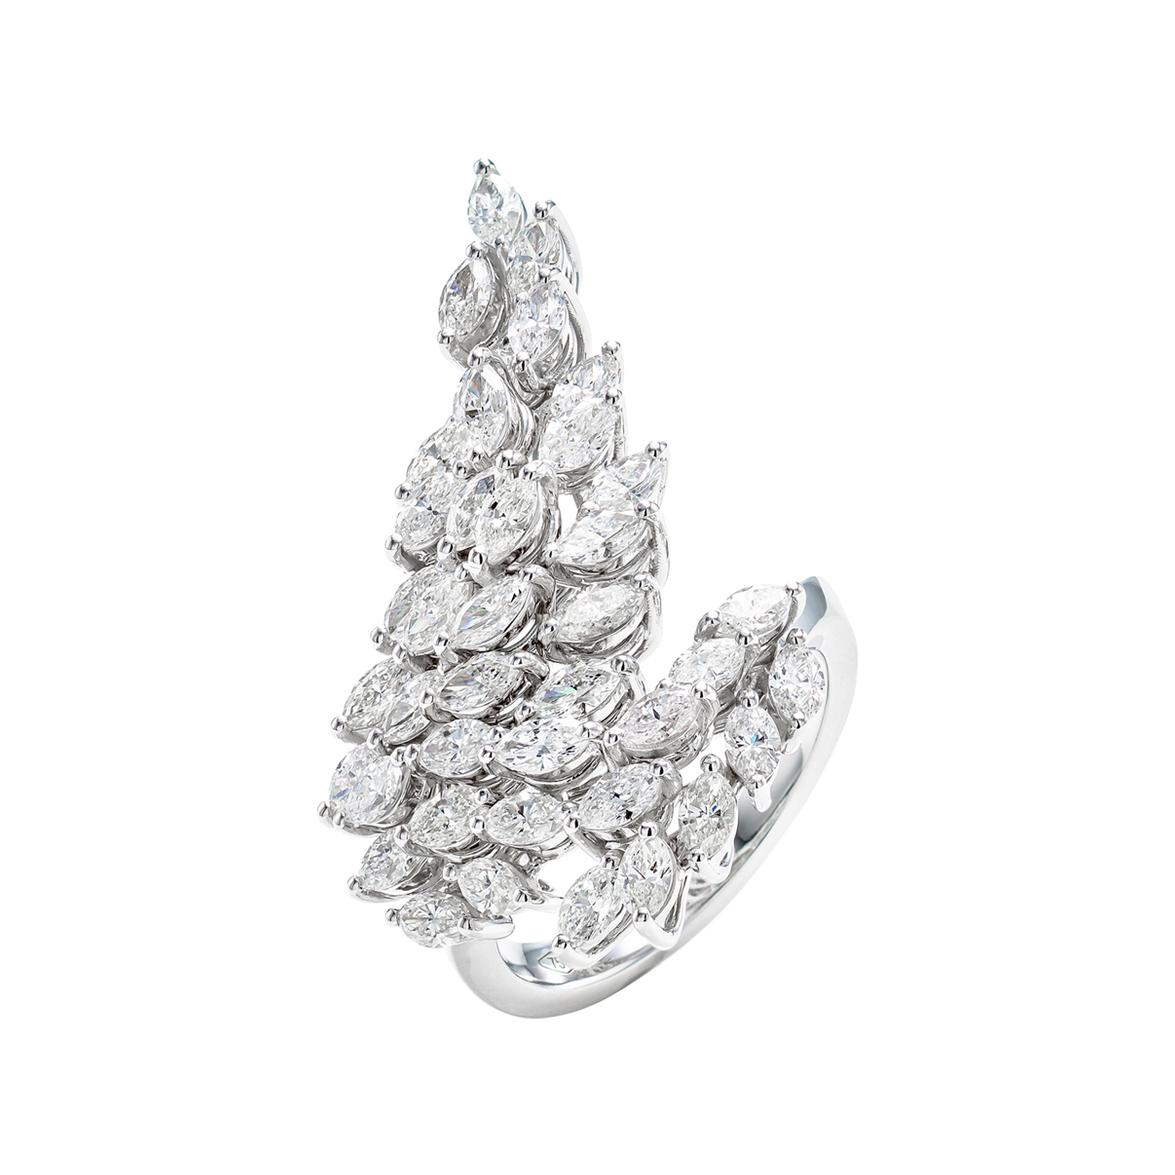 3.68 Carat Marquise Wrap Wings Diamond Ring in 18K White Gold